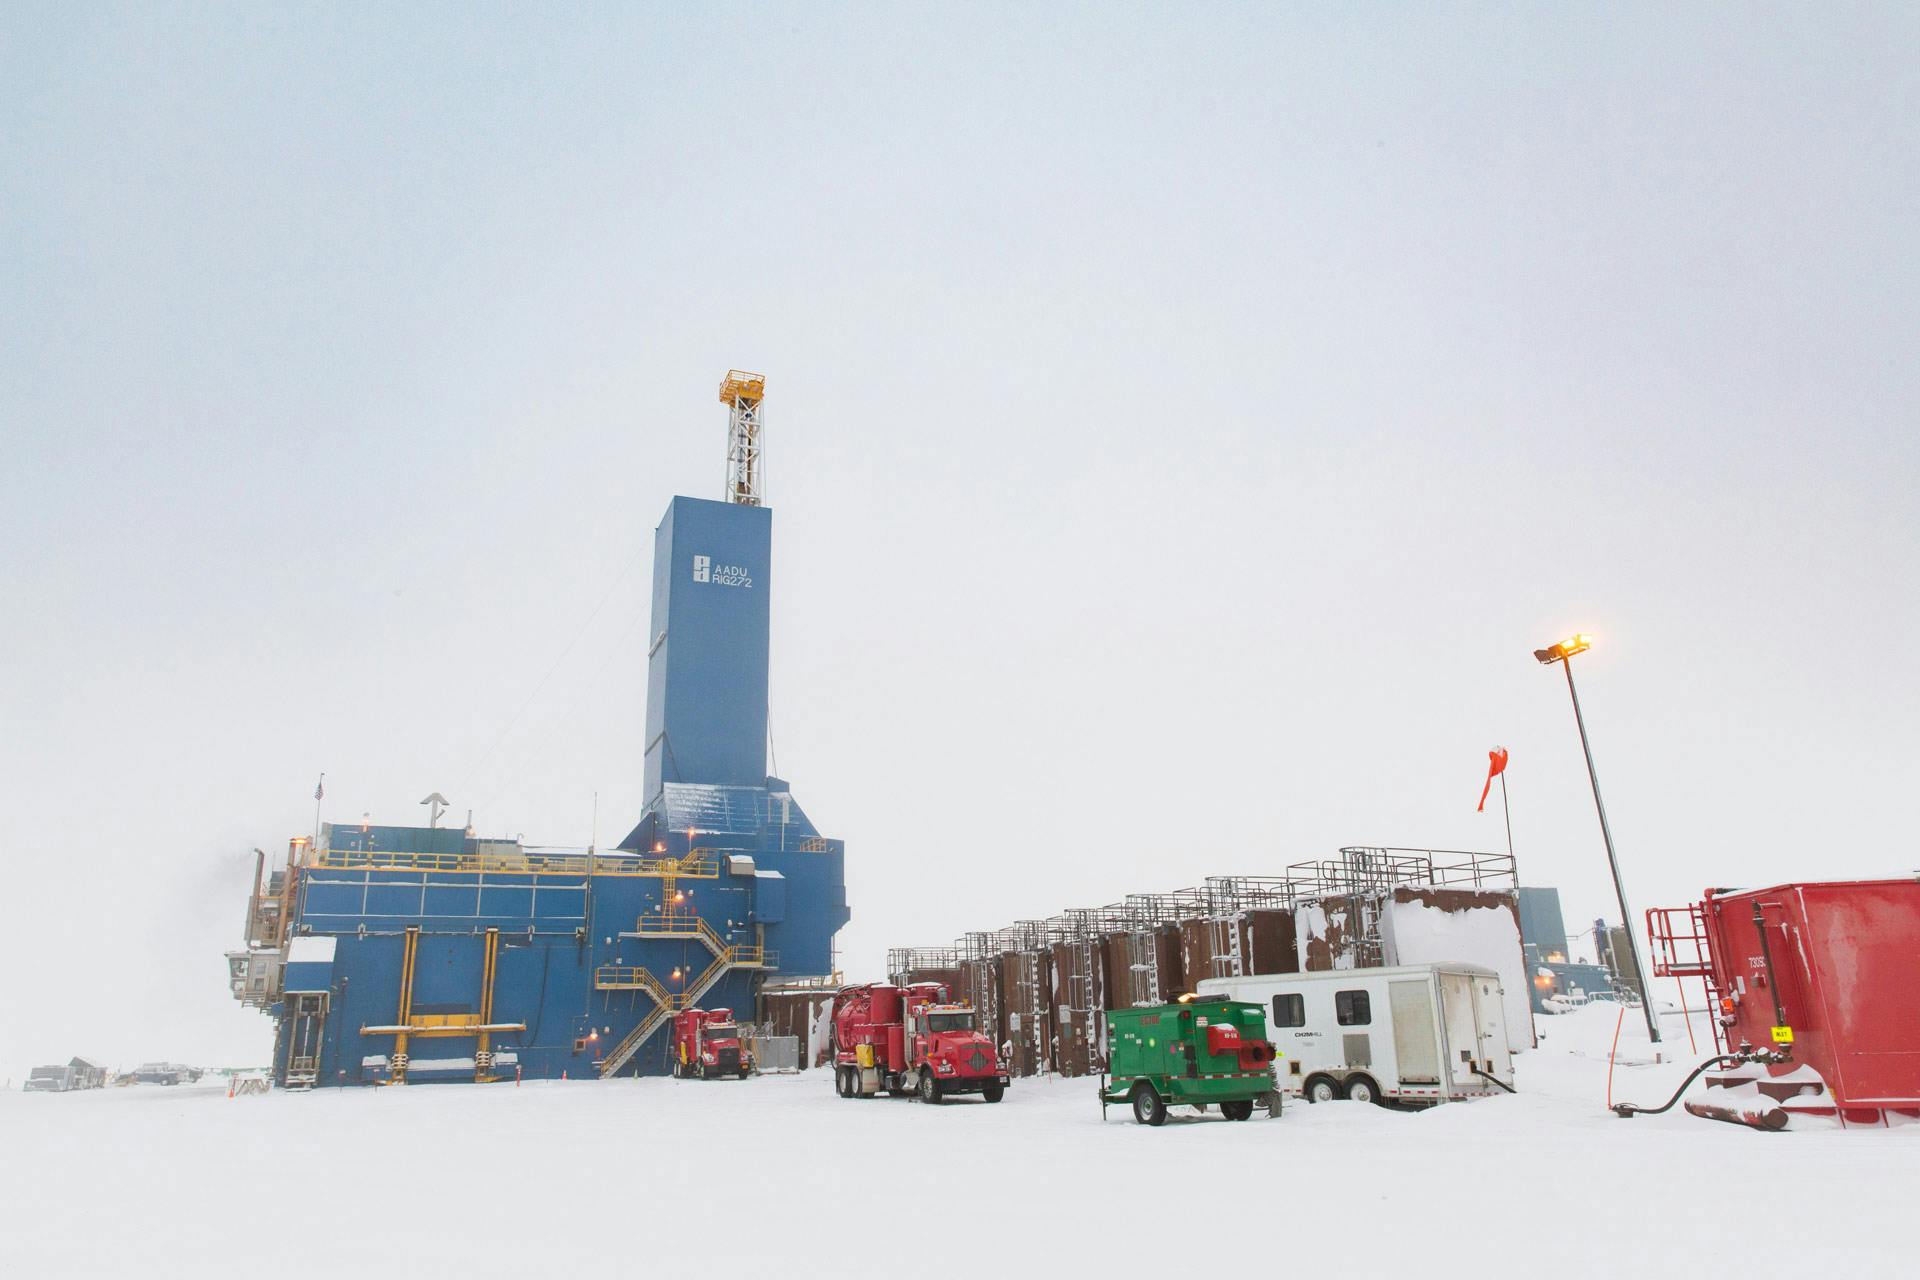 Rig site in winter